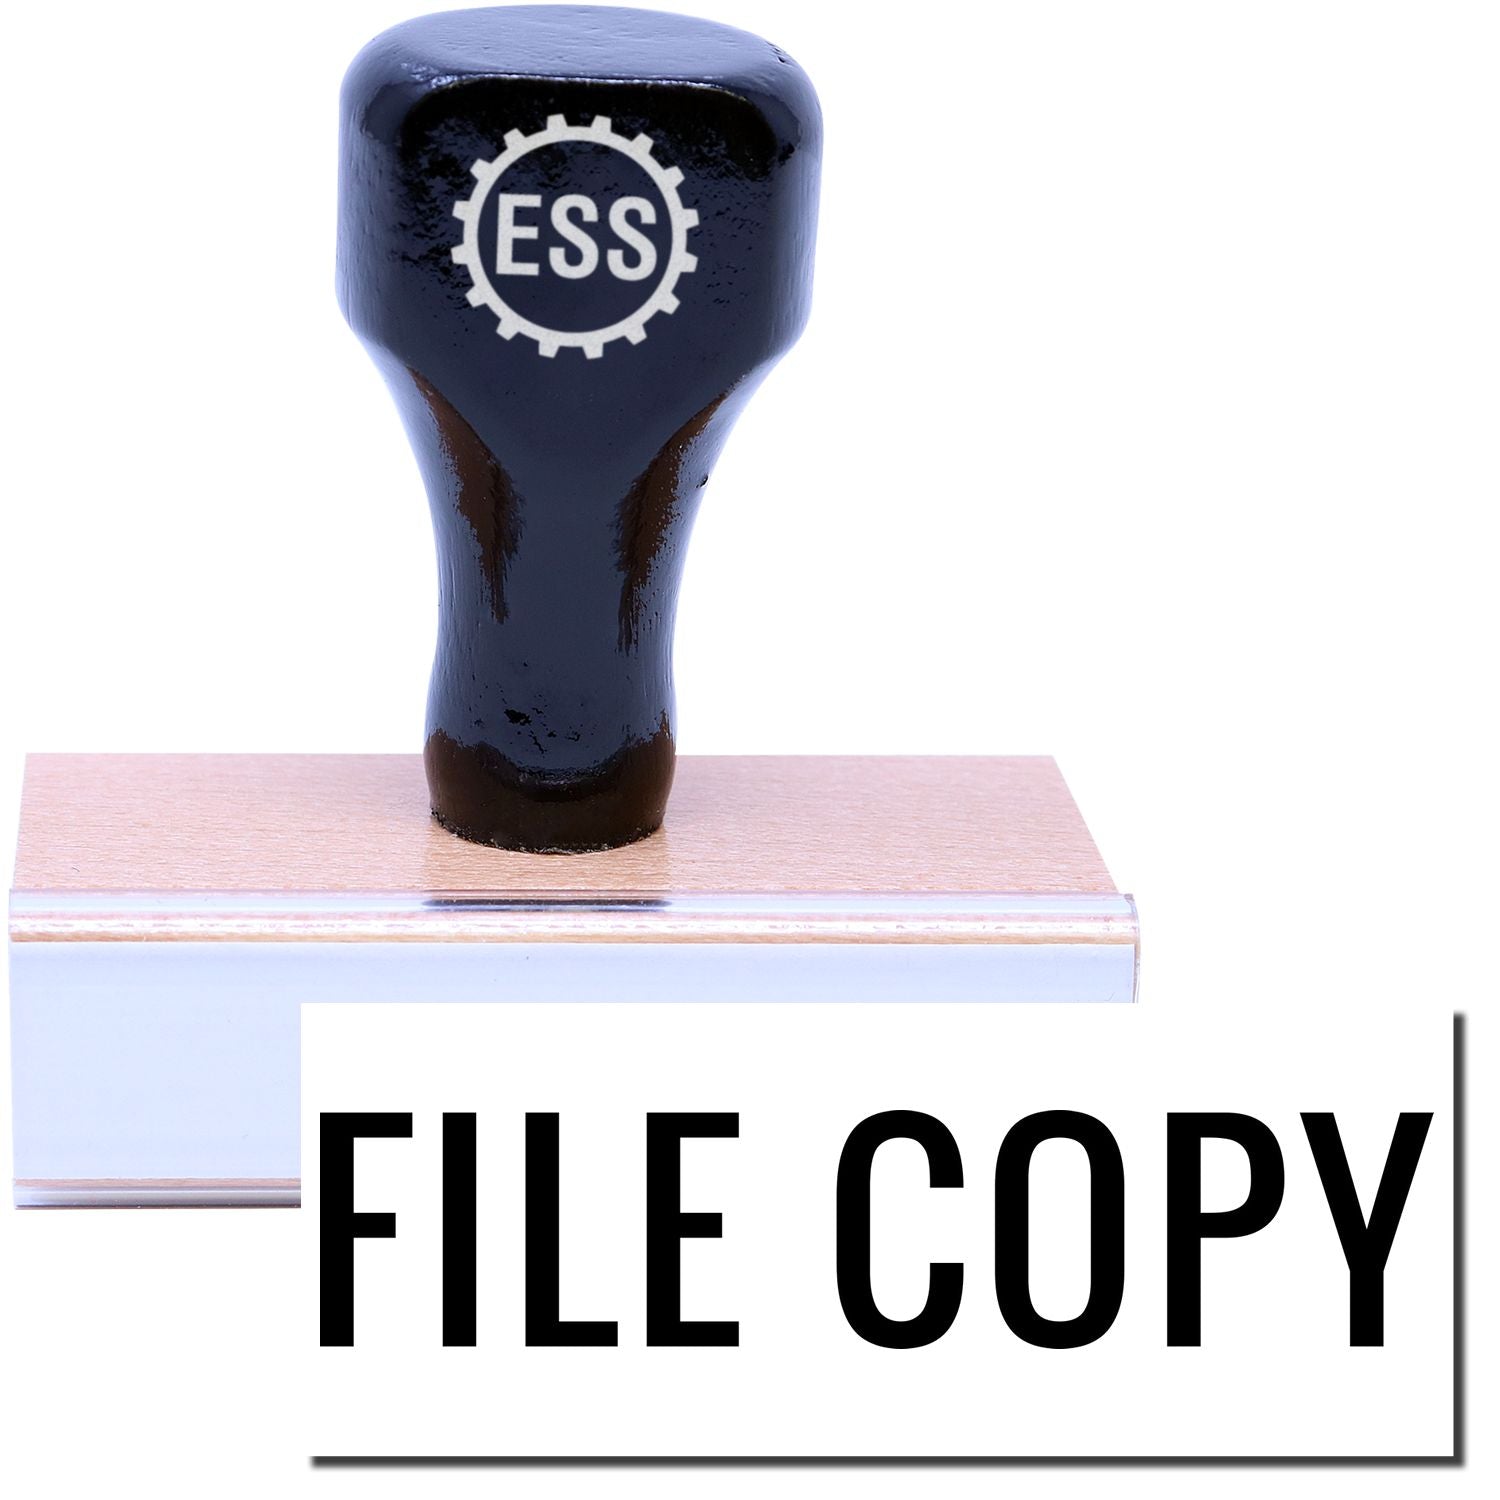 A stock office rubber stamp with a stamped image showing how the text "FILE COPY" in a large narrow font is displayed after stamping.